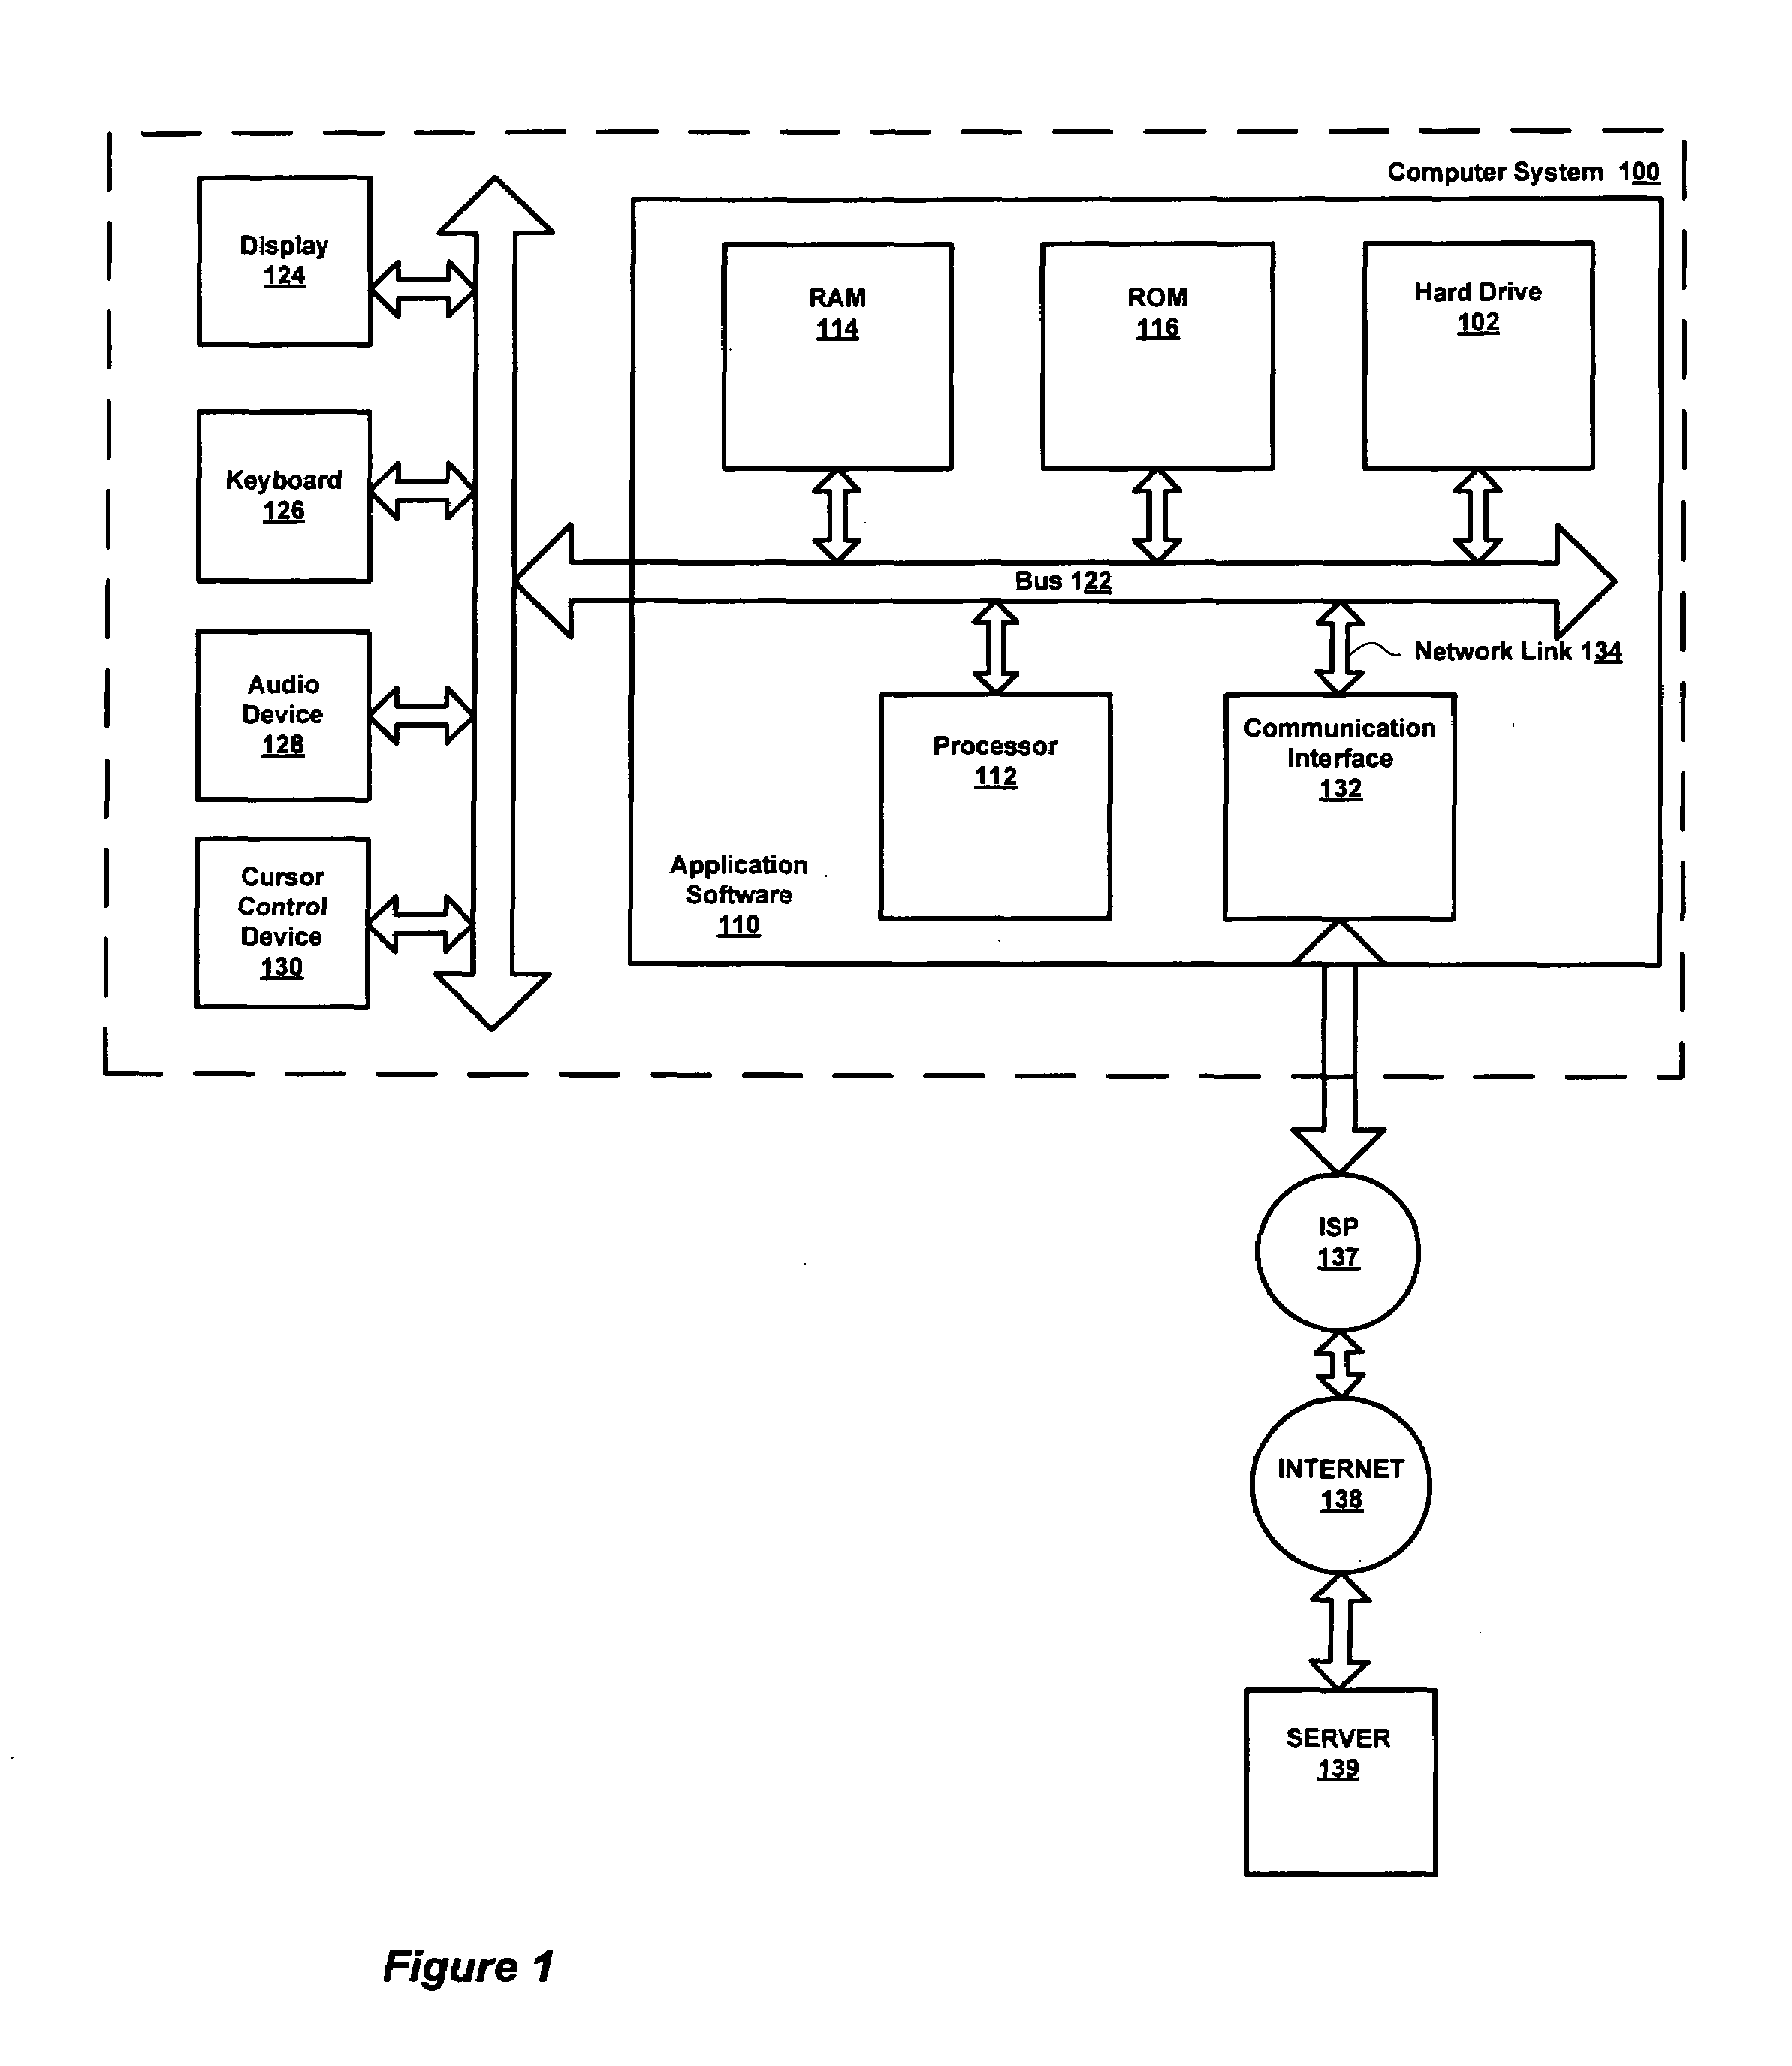 Method and system for renderring application text in one or more alternative languages